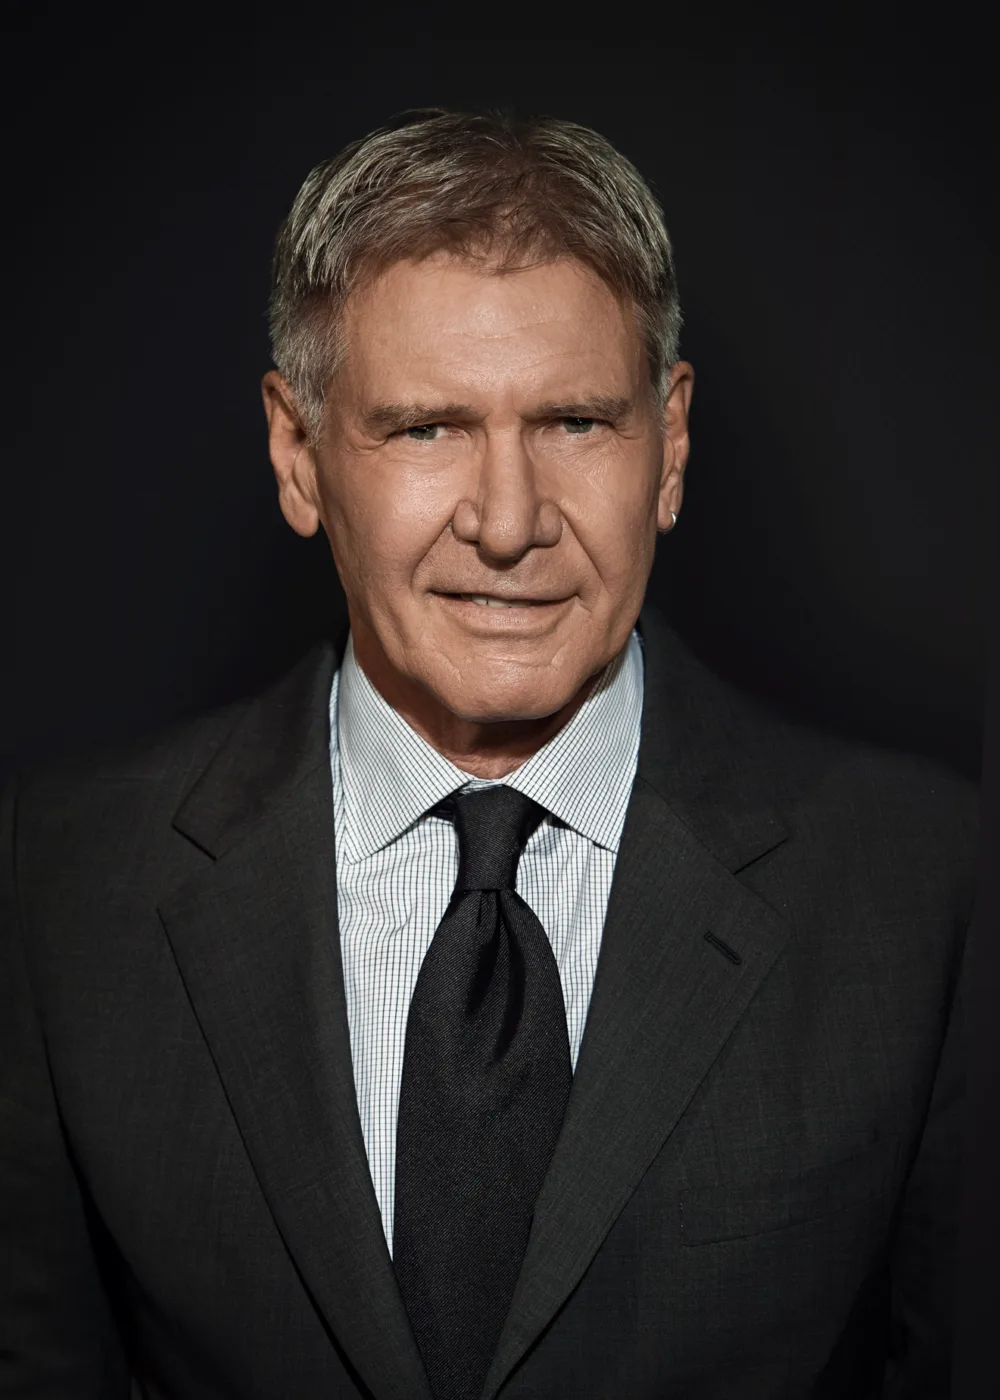 Harrison Ford is an American actor and film producer who has had an illustrious career in Hollywood spanning over five decades. Born on July 13, 1942, in Chicago, Illinois, Ford first gained fame for his iconic portrayal of Han Solo in the original Star Wars trilogy. He also played the lead role in the Indiana Jones film franchise. Ford is known for his ability to bring depth and nuance to every character he portrays, and has received numerous accolades throughout his career, including a Primetime Emmy Award and a Screen Actors Guild Award. He has also been nominated for an Academy Award, a BAFTA Award, and several Golden Globe Awards. In addition to his work in film, Ford is also an aviation enthusiast and an advocate for environmental causes. He is actively involved in conservation efforts and has served on the board of directors for several environmental organizations. With his talent, charisma, and commitment to social and environmental causes, Ford has become one of the most beloved and respected actors of his generation, known for his ability to captivate audiences with his powerful performances and his dedication to making the world a better place.